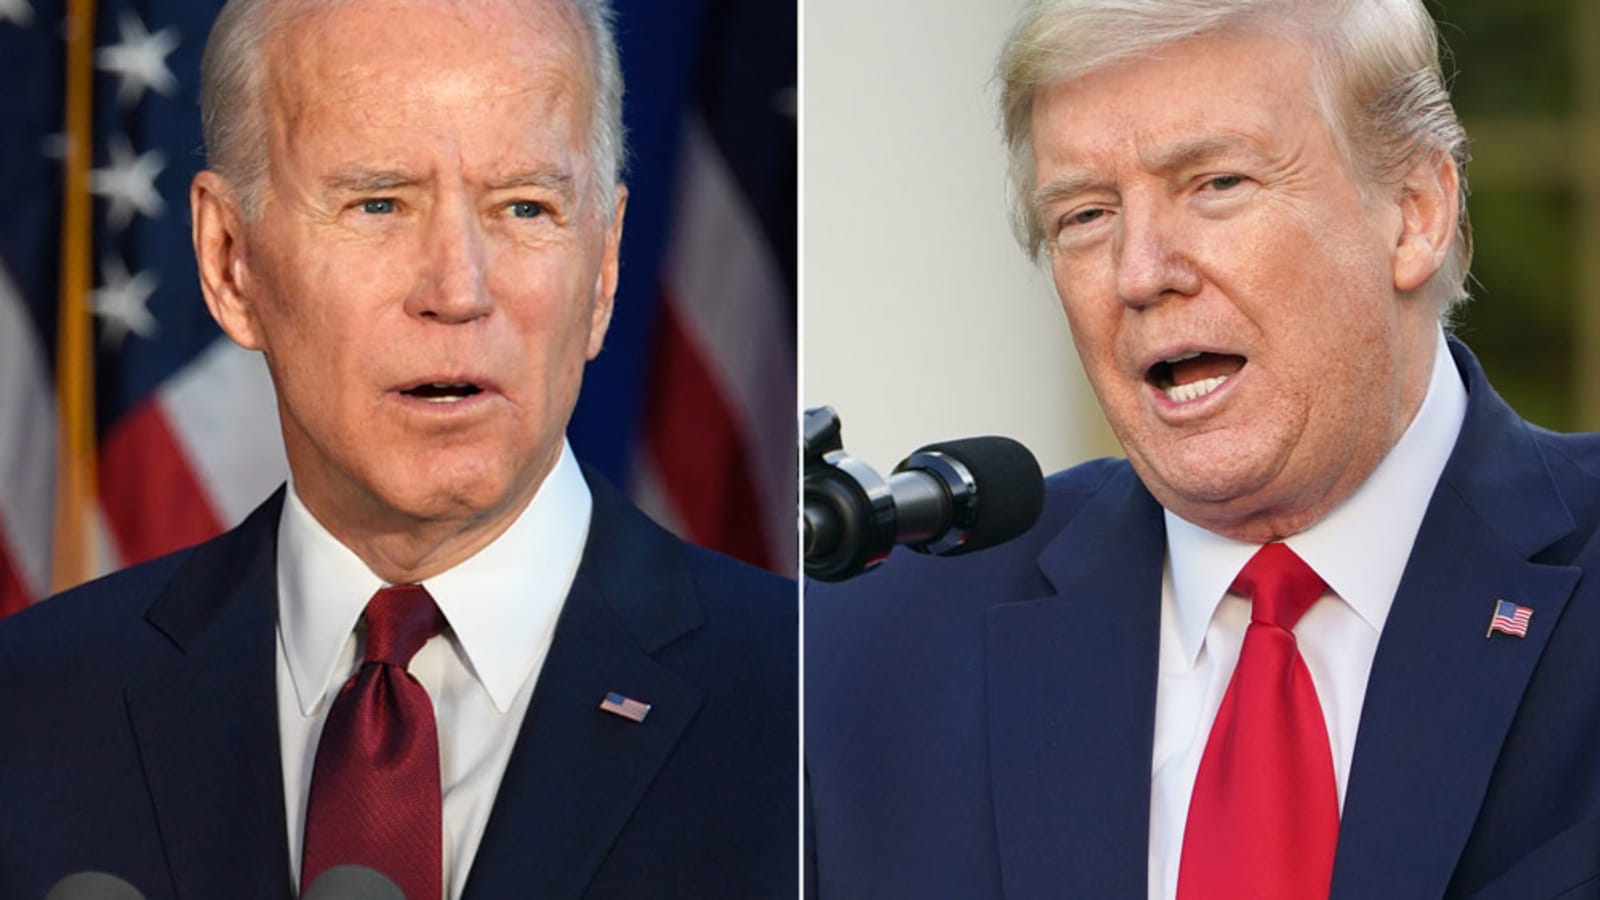 election news: Voters see Trump, Biden as mentally unfit to be president